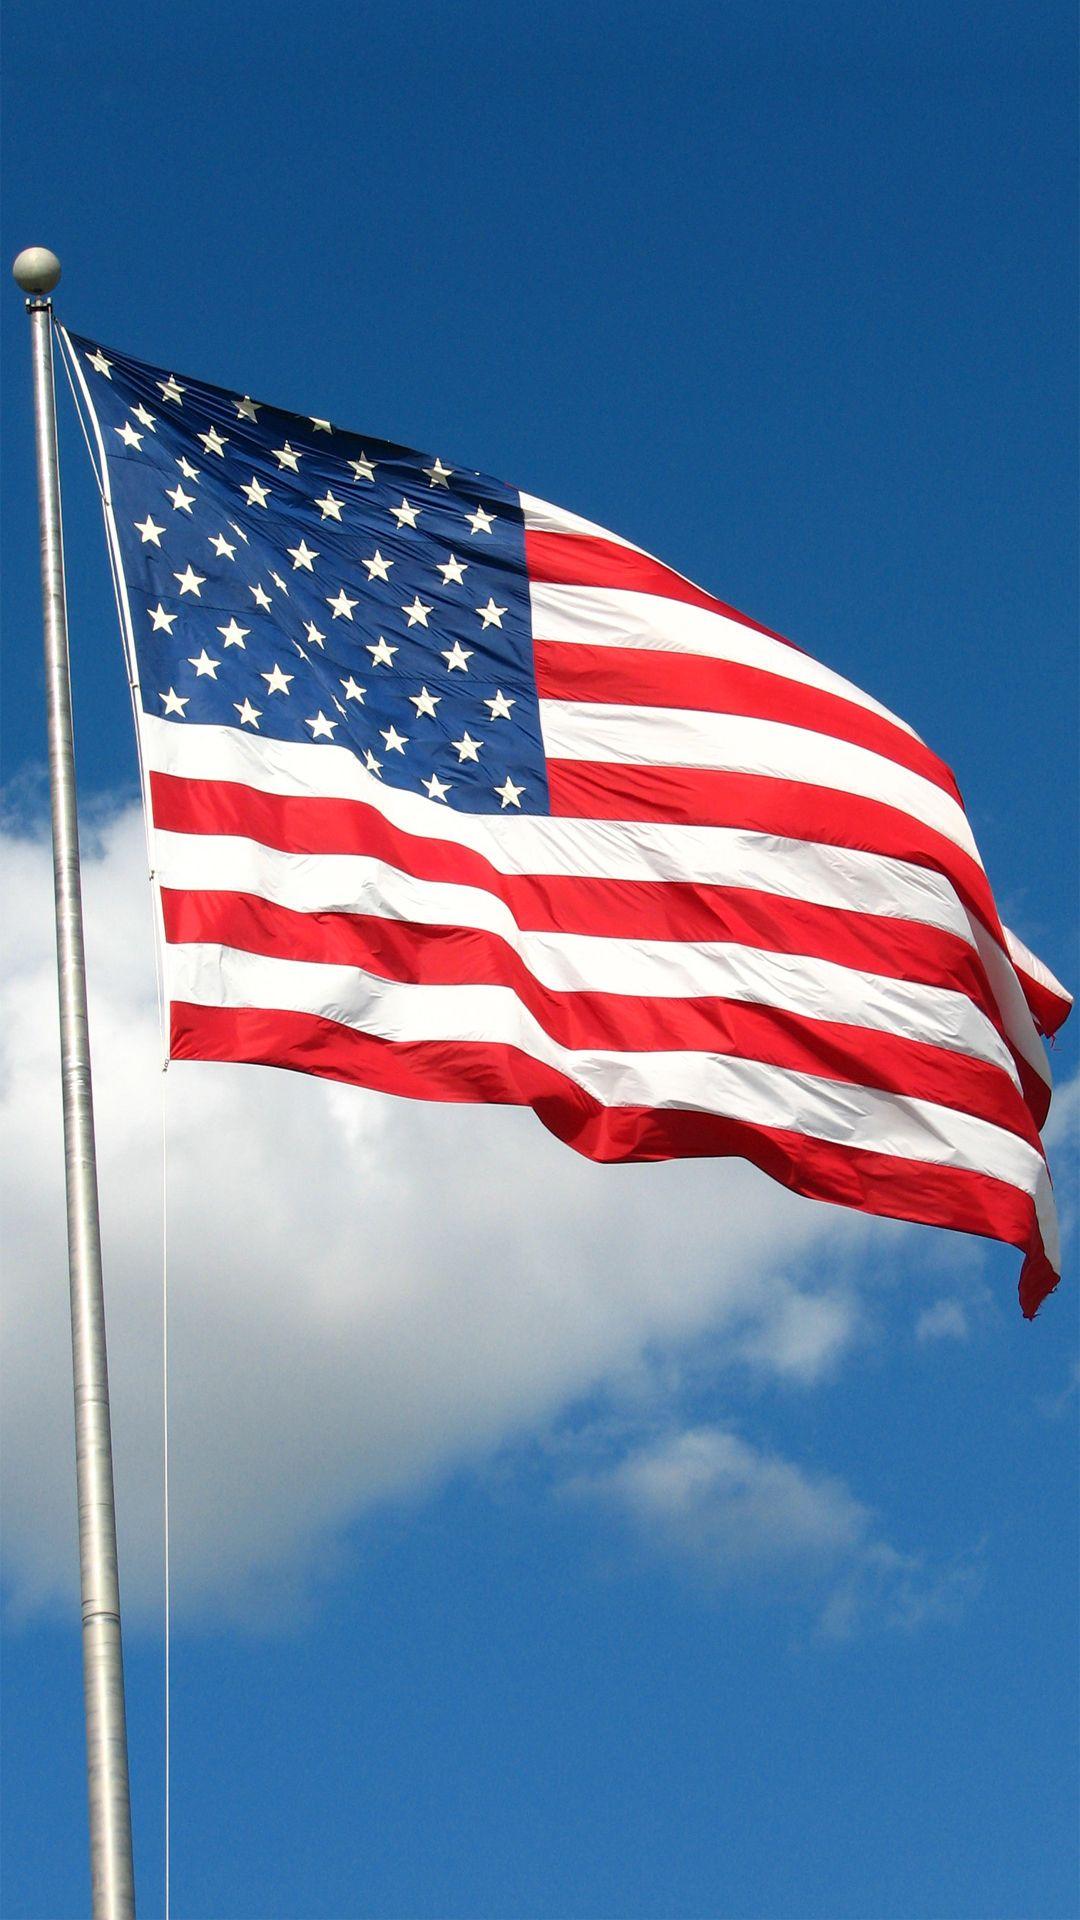 USA flag htc one wallpaper, free and easy to download